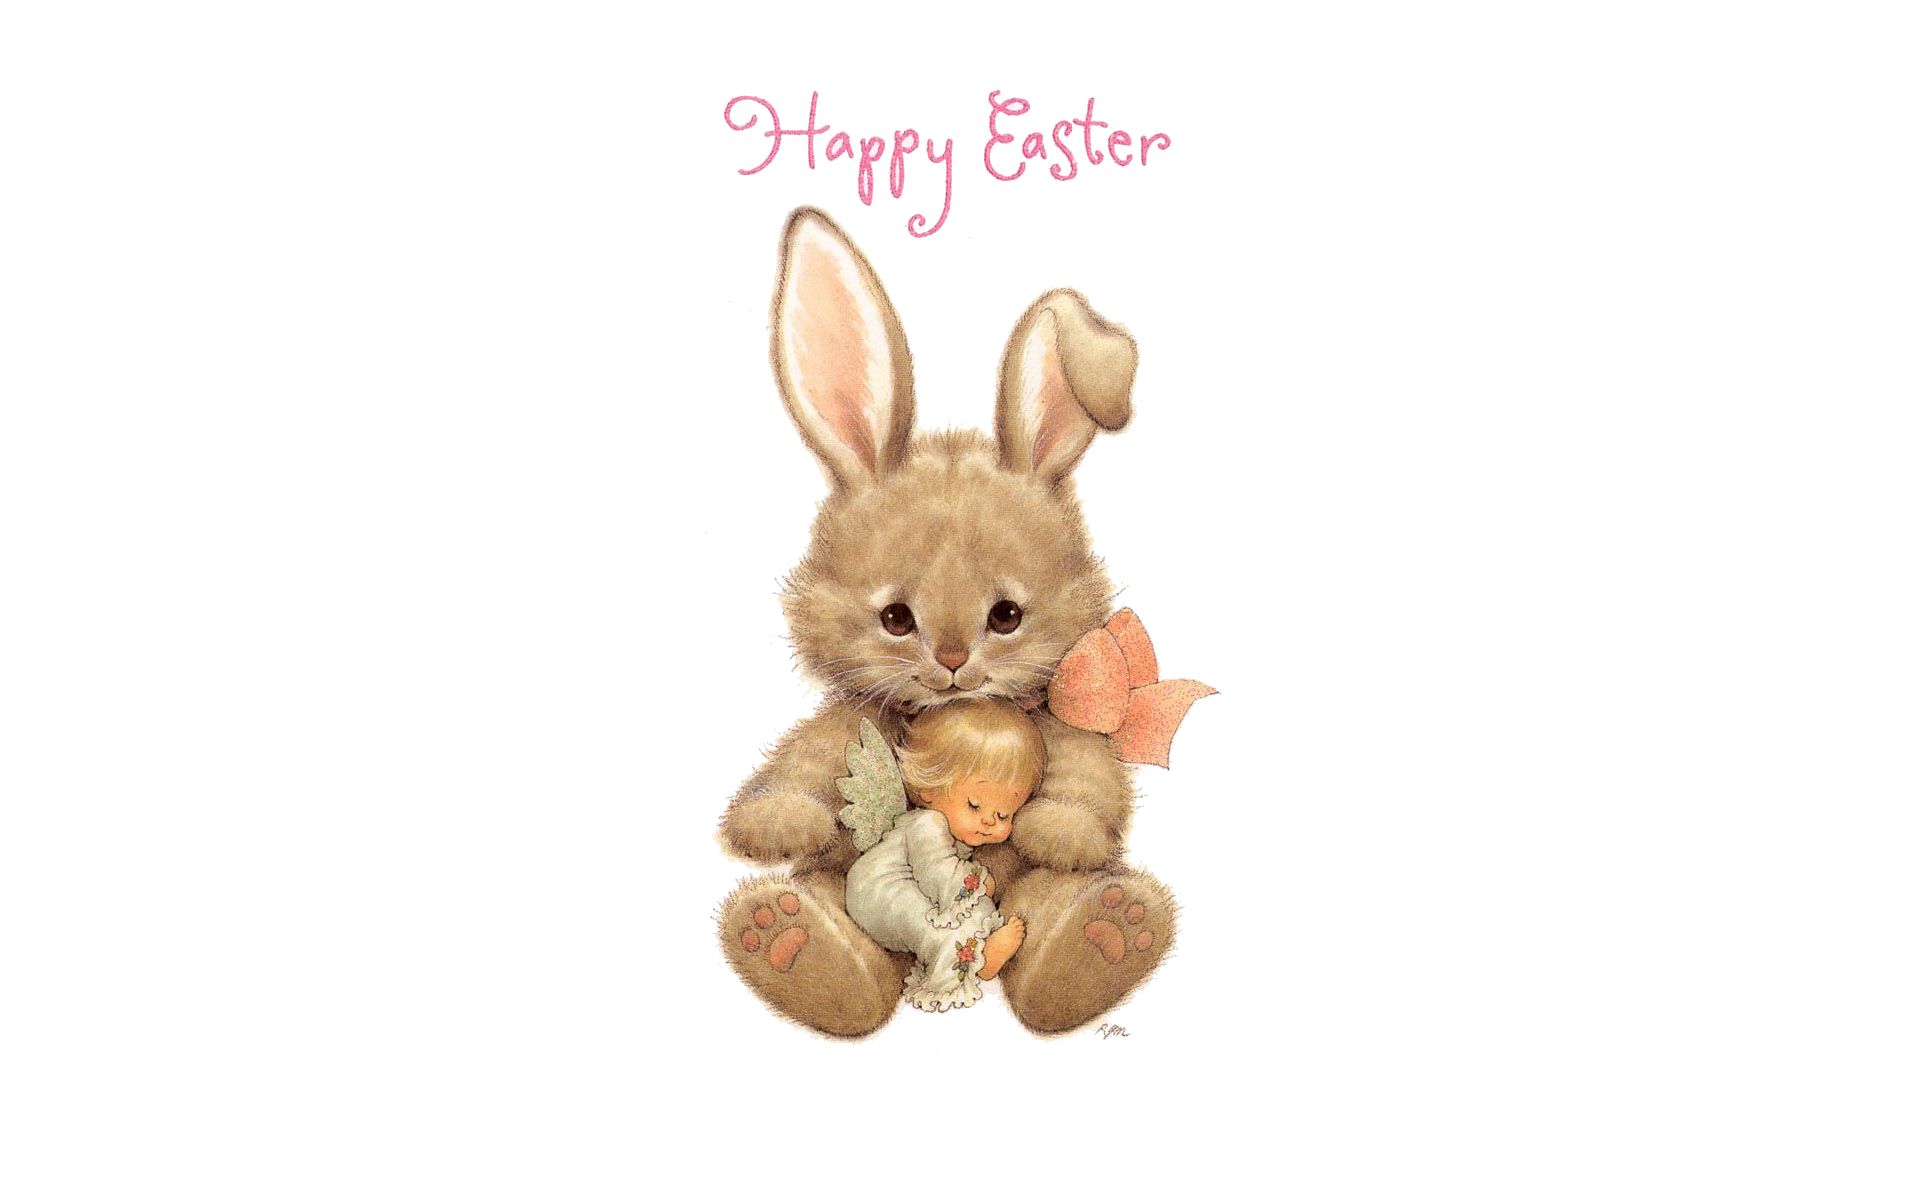 happy easter, holiday, easter, angel, bunny, child, little girl